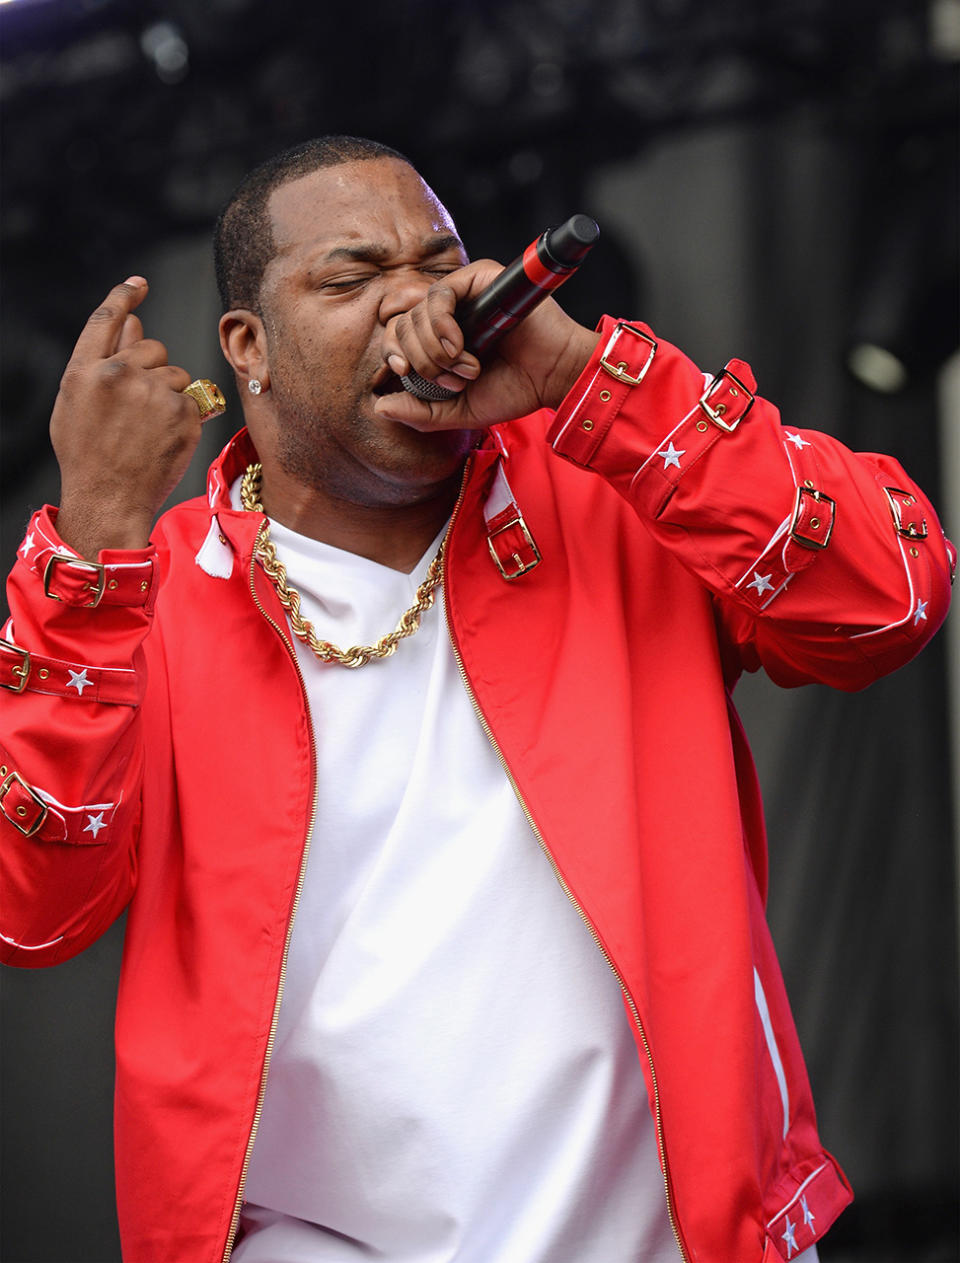 <p>Rapper Busta Rhymes performs onstage during the 2017 Firefly Music Festival on June 18, 2017 in Dover, Delaware. (Photo by Kevin Mazur/Getty Images for Firefly) </p>